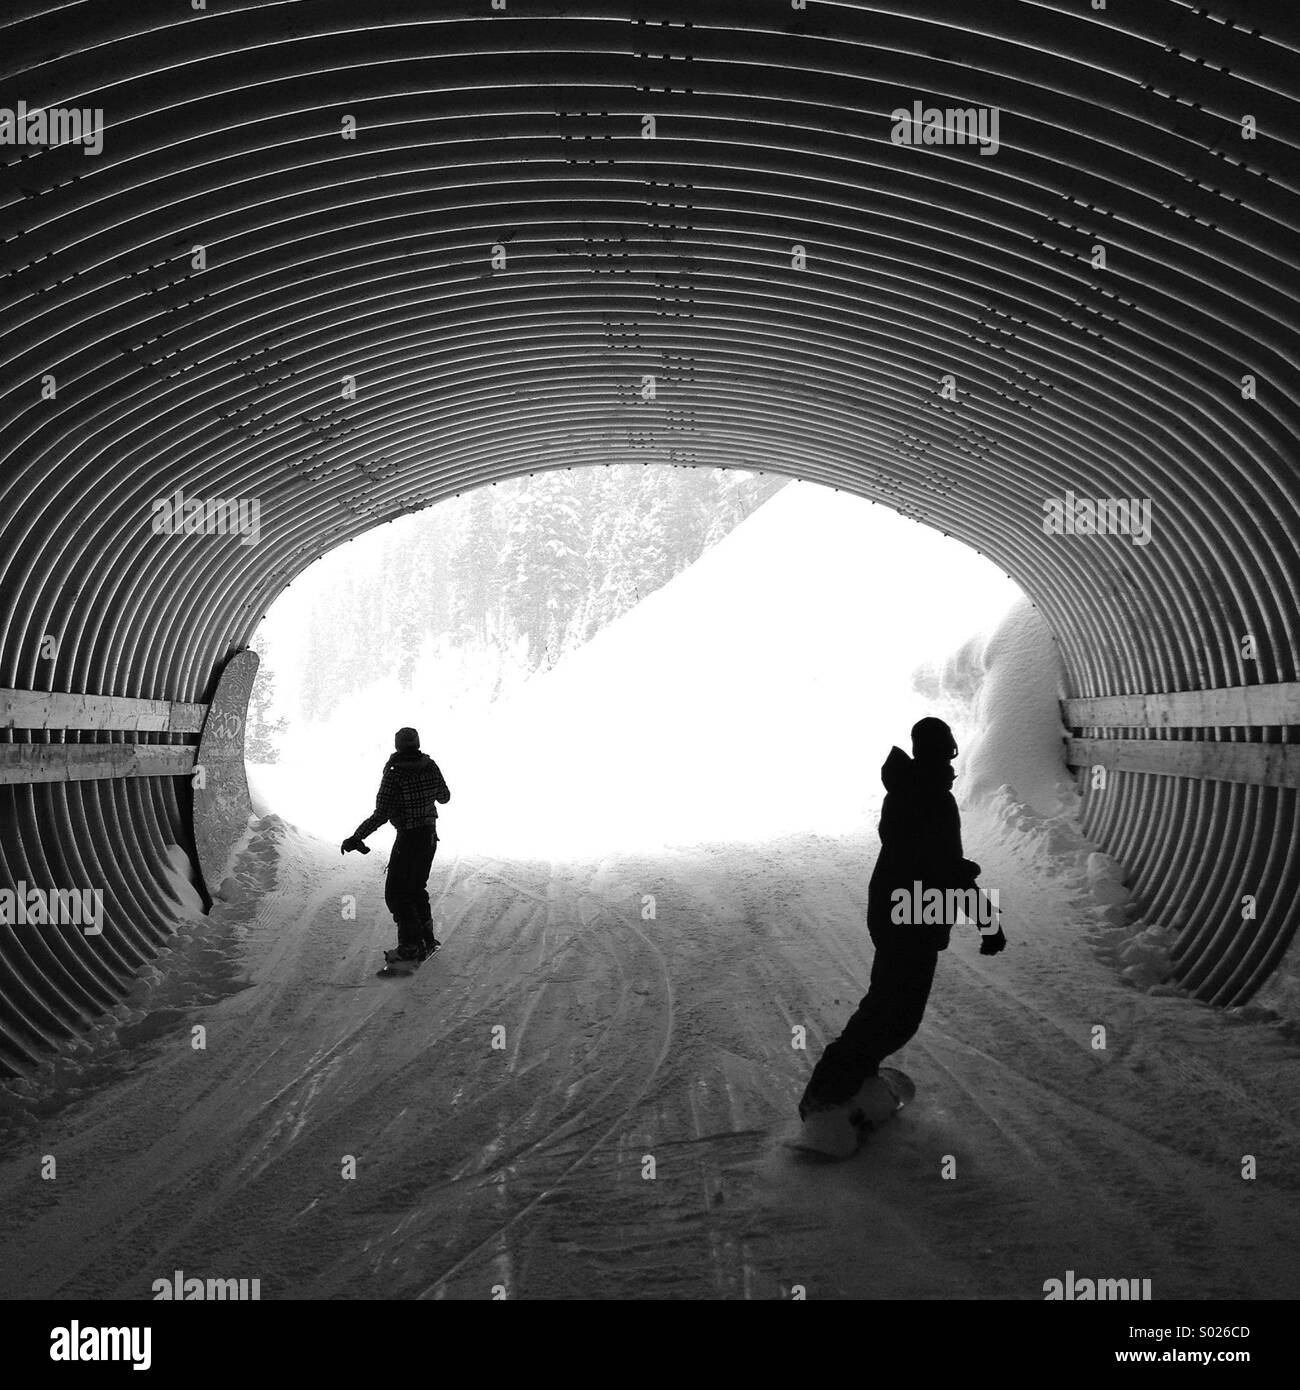 Snowboarders in a tunnel Stock Photo